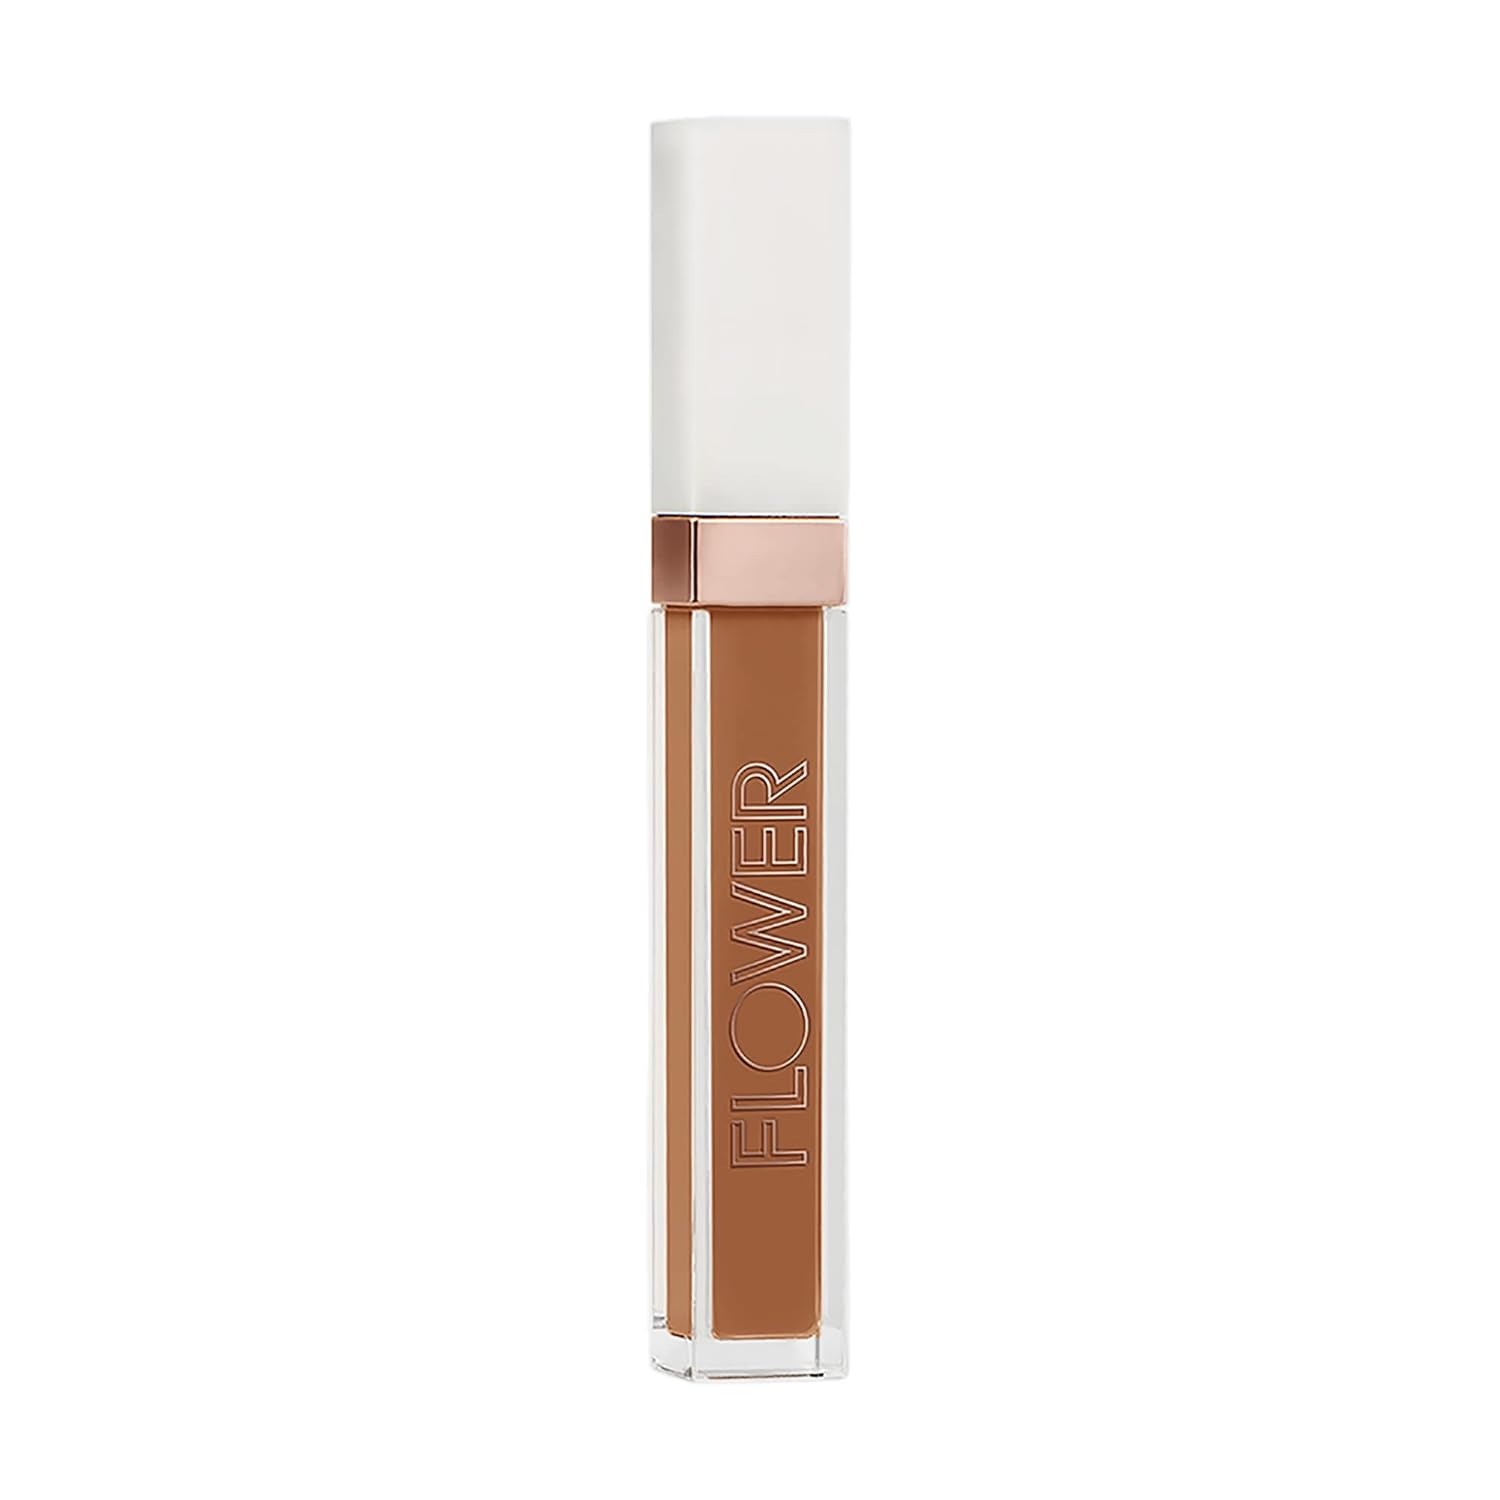 OWER BEAUTY Light Illusion Full Coverage Concealer - Almond, 1 ea